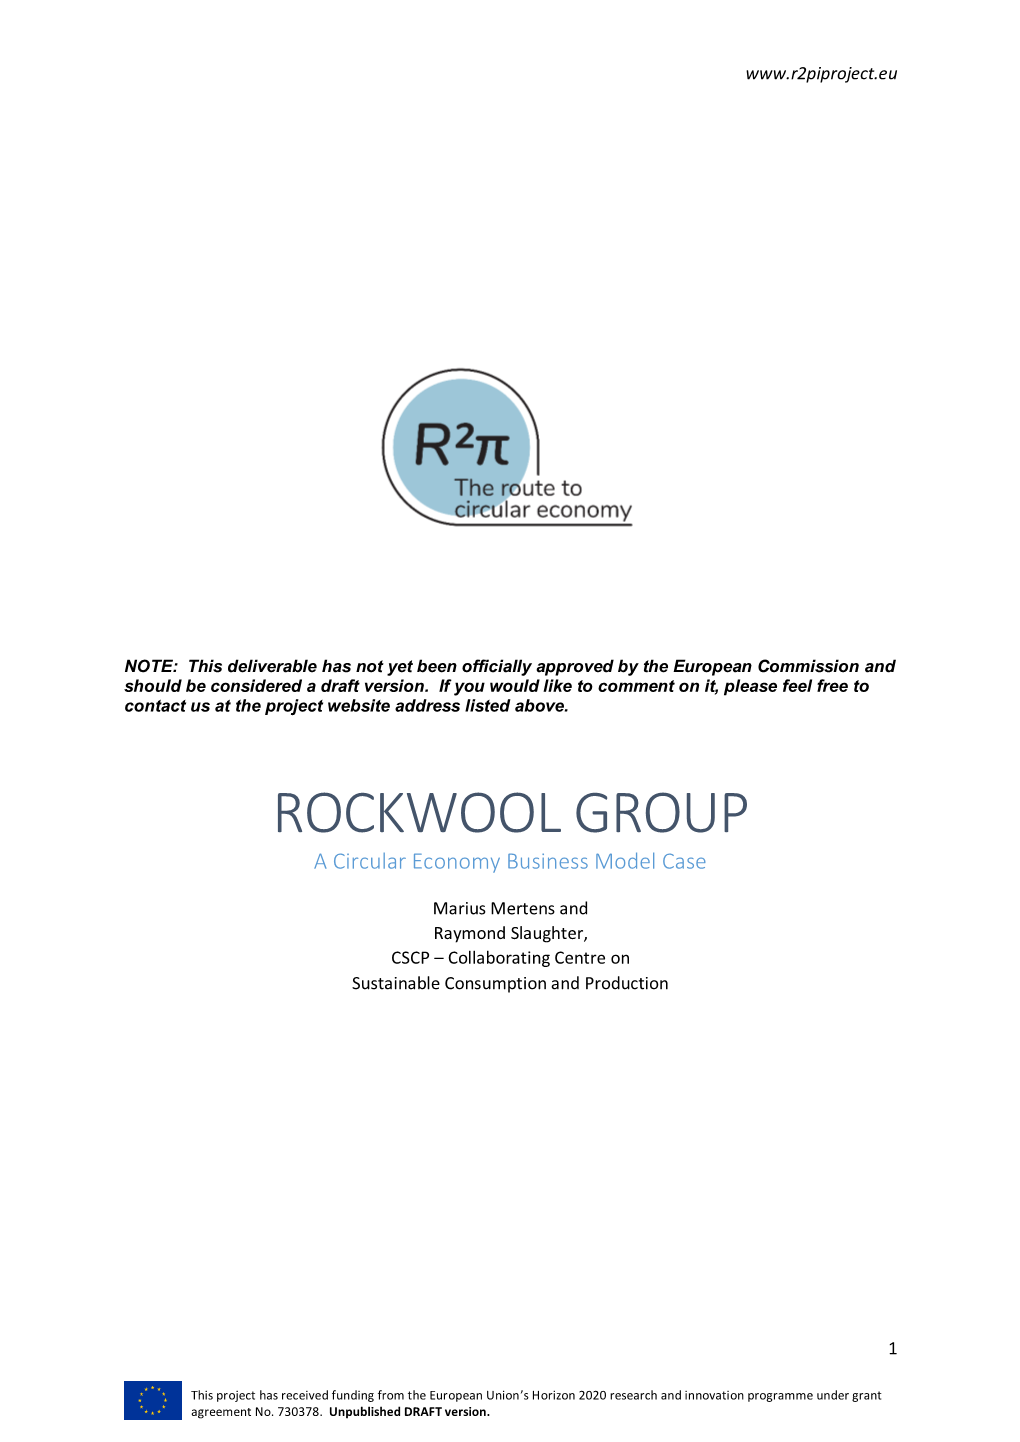 ROCKWOOL GROUP a Circular Economy Business Model Case